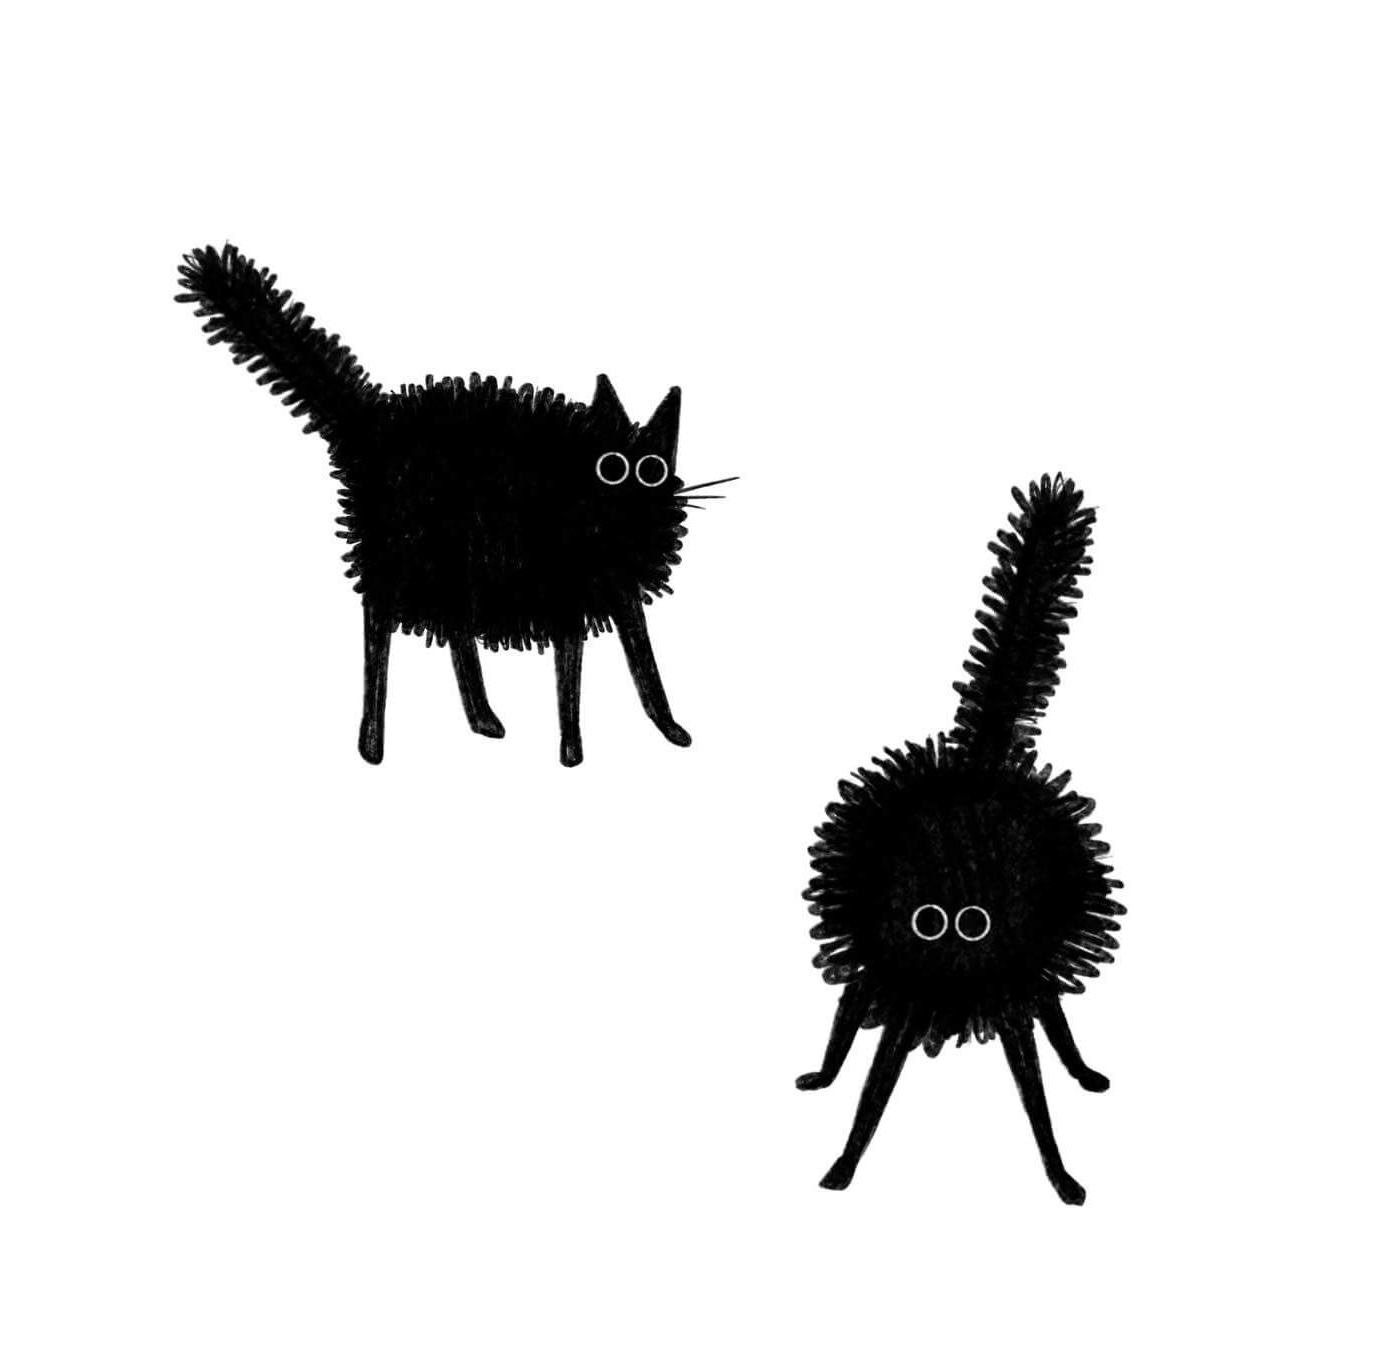 Two scared black cats, illustration by Shawna Mercano